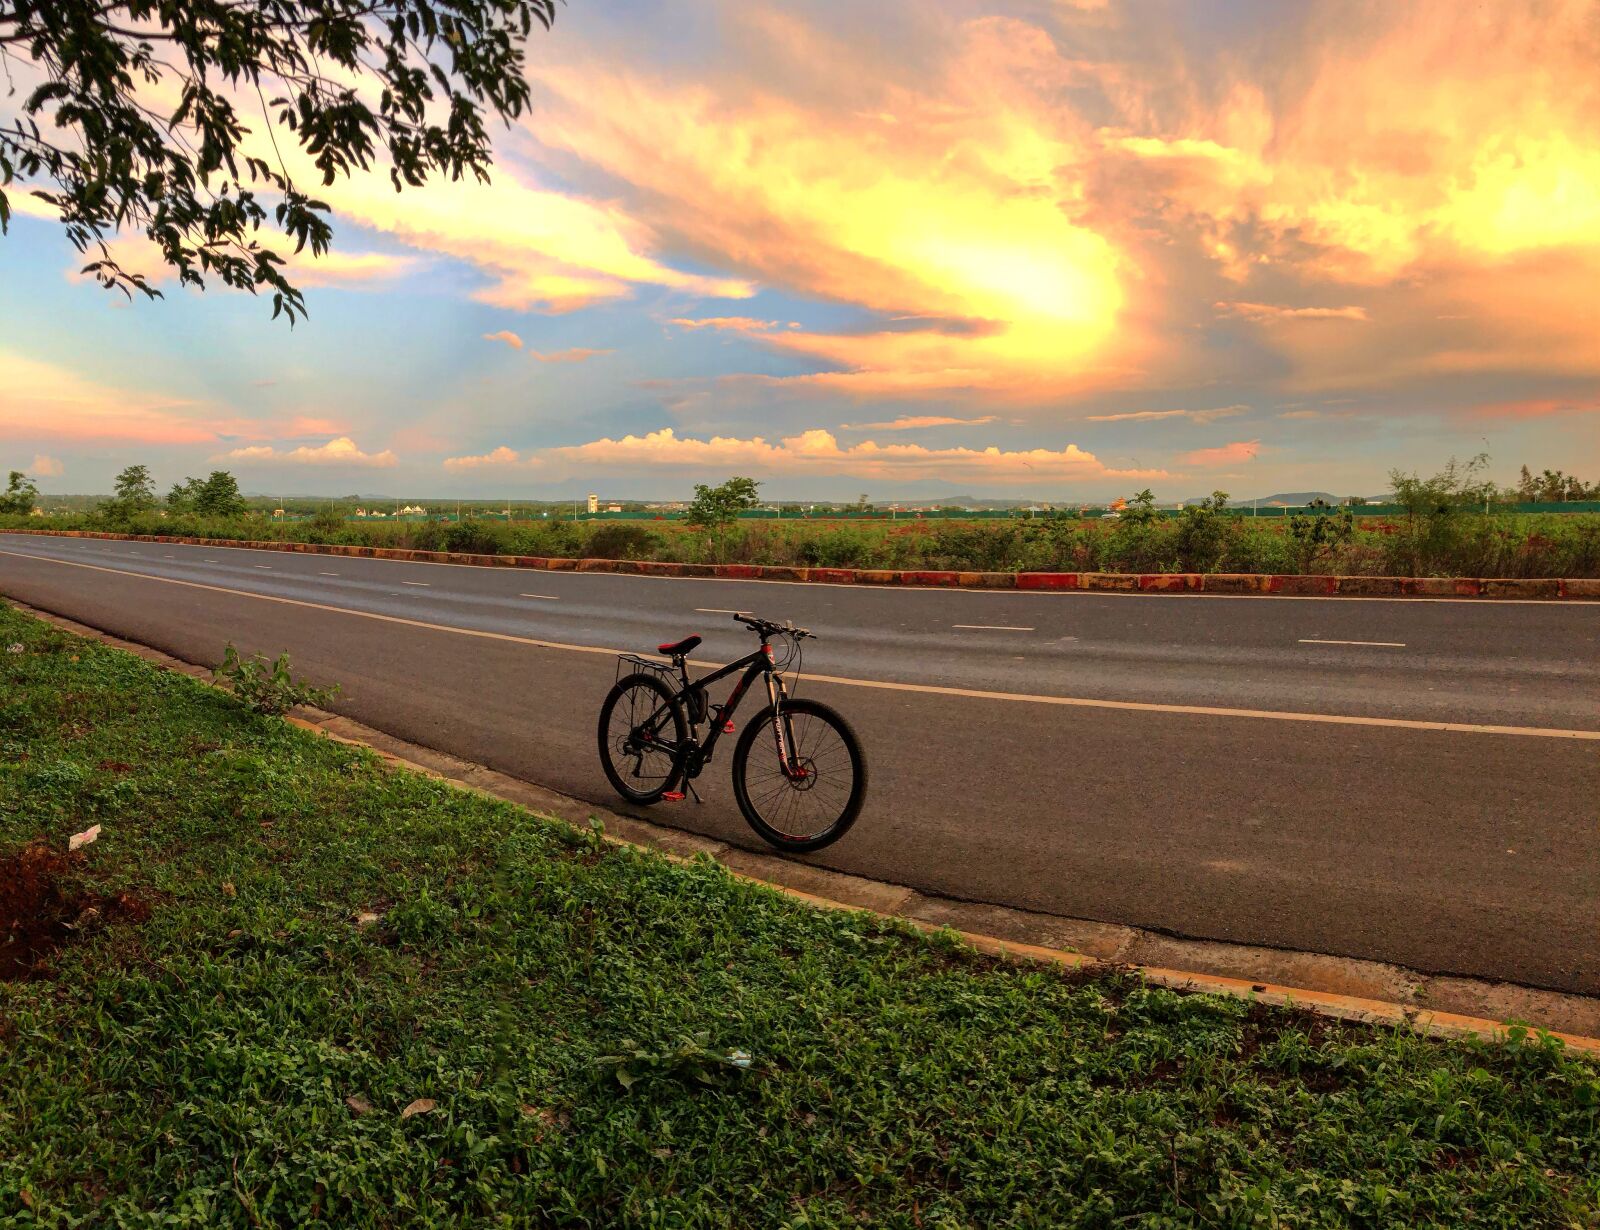 Apple iPhone X + iPhone X back camera 4mm f/1.8 sample photo. Bicycle, afternoon, beautiful nature photography